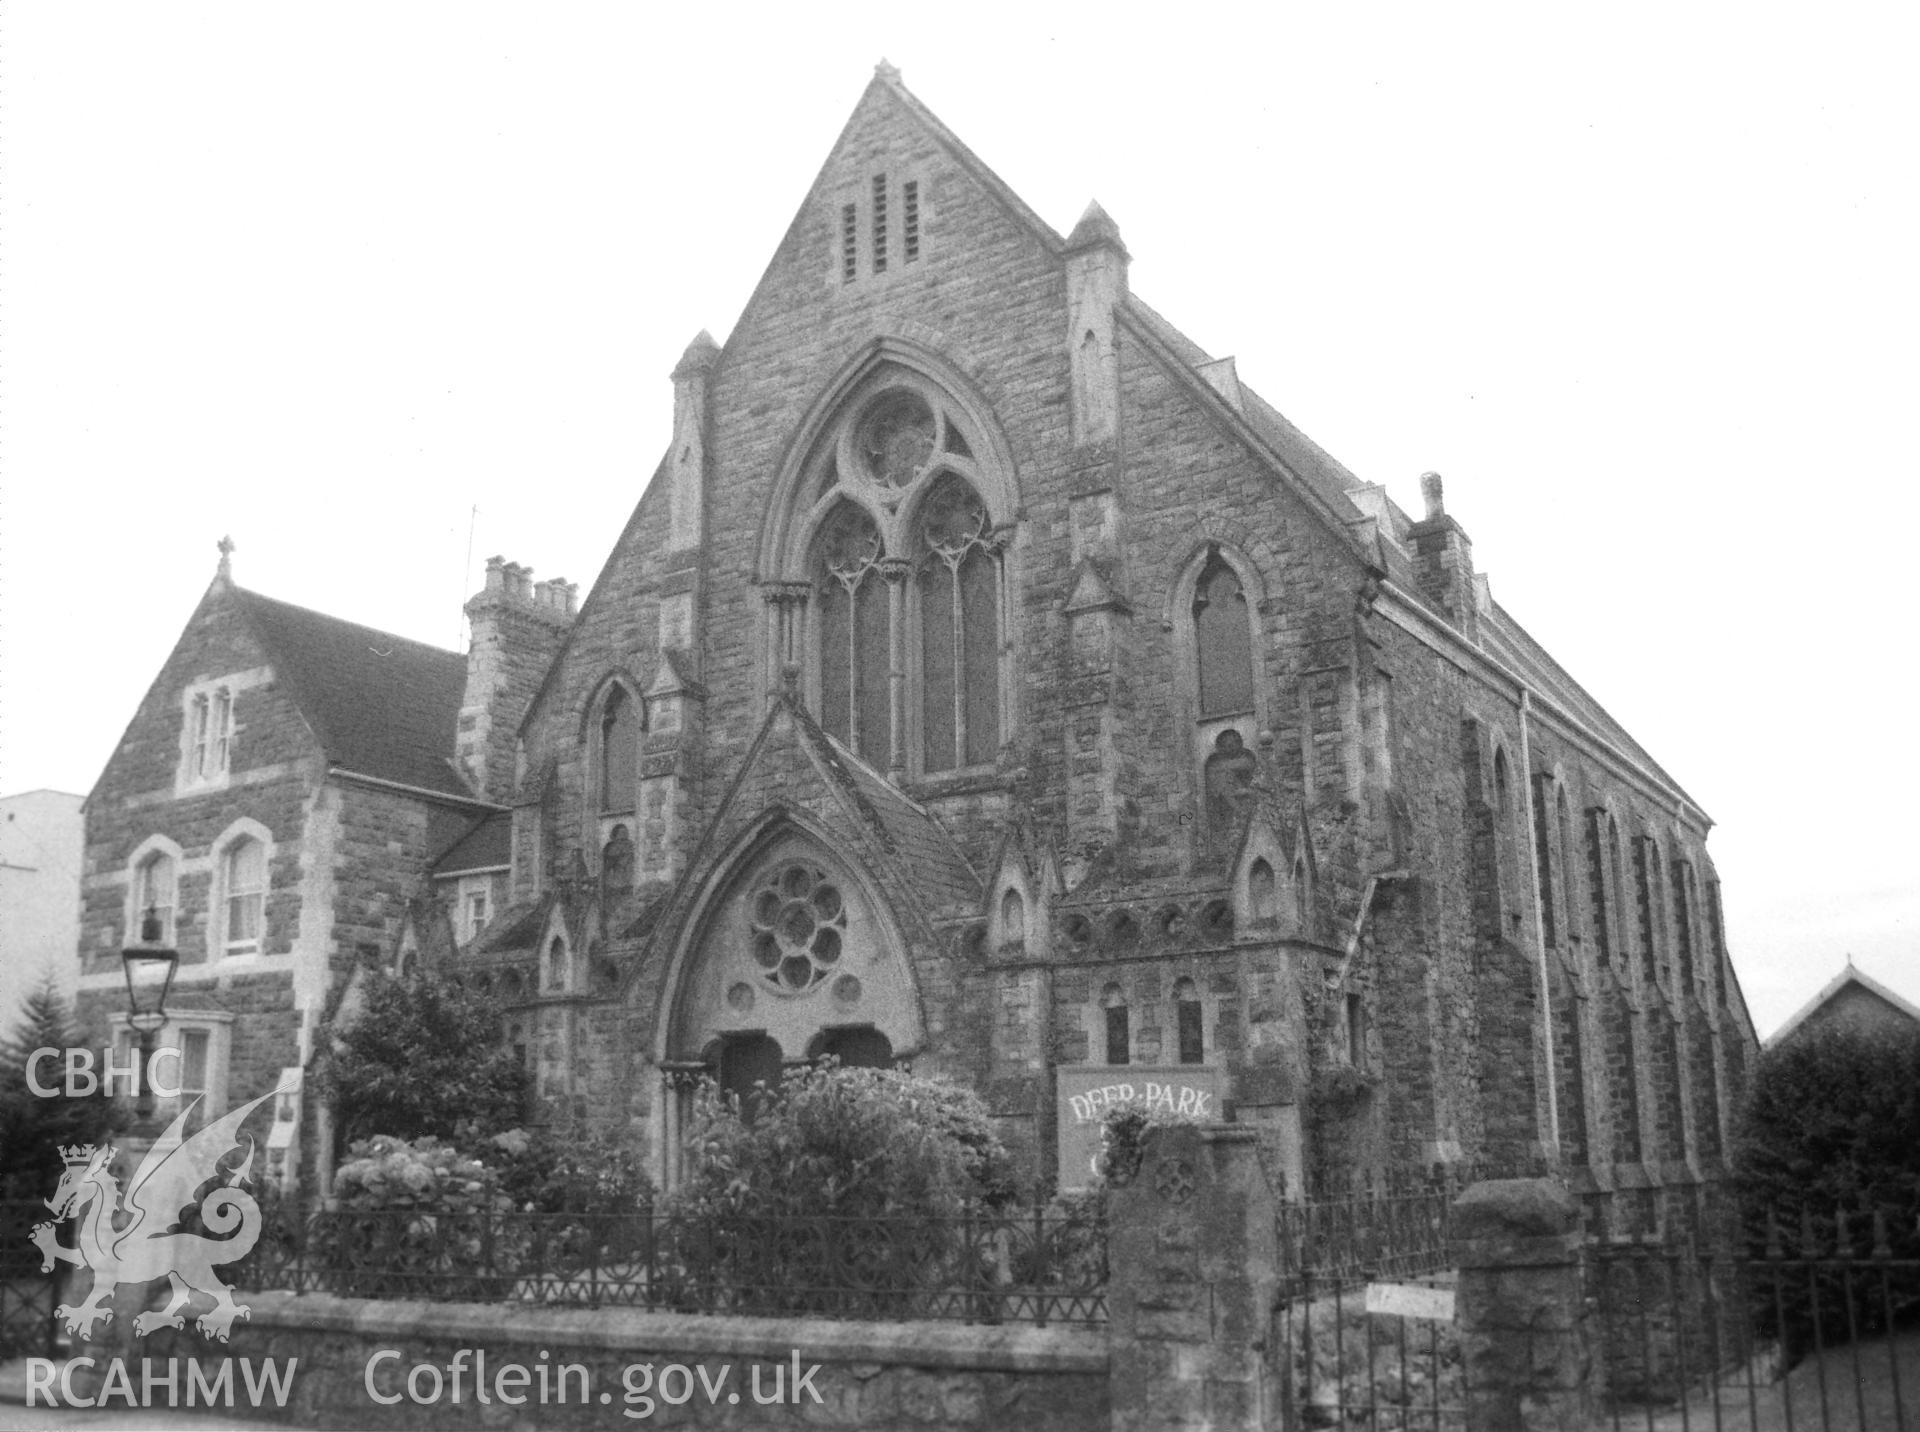 Digital copy of a black and white photograph showing an exterior view of Deer Park Baptist Chapel, Tenby, taken by Robert Scourfield, 1995.